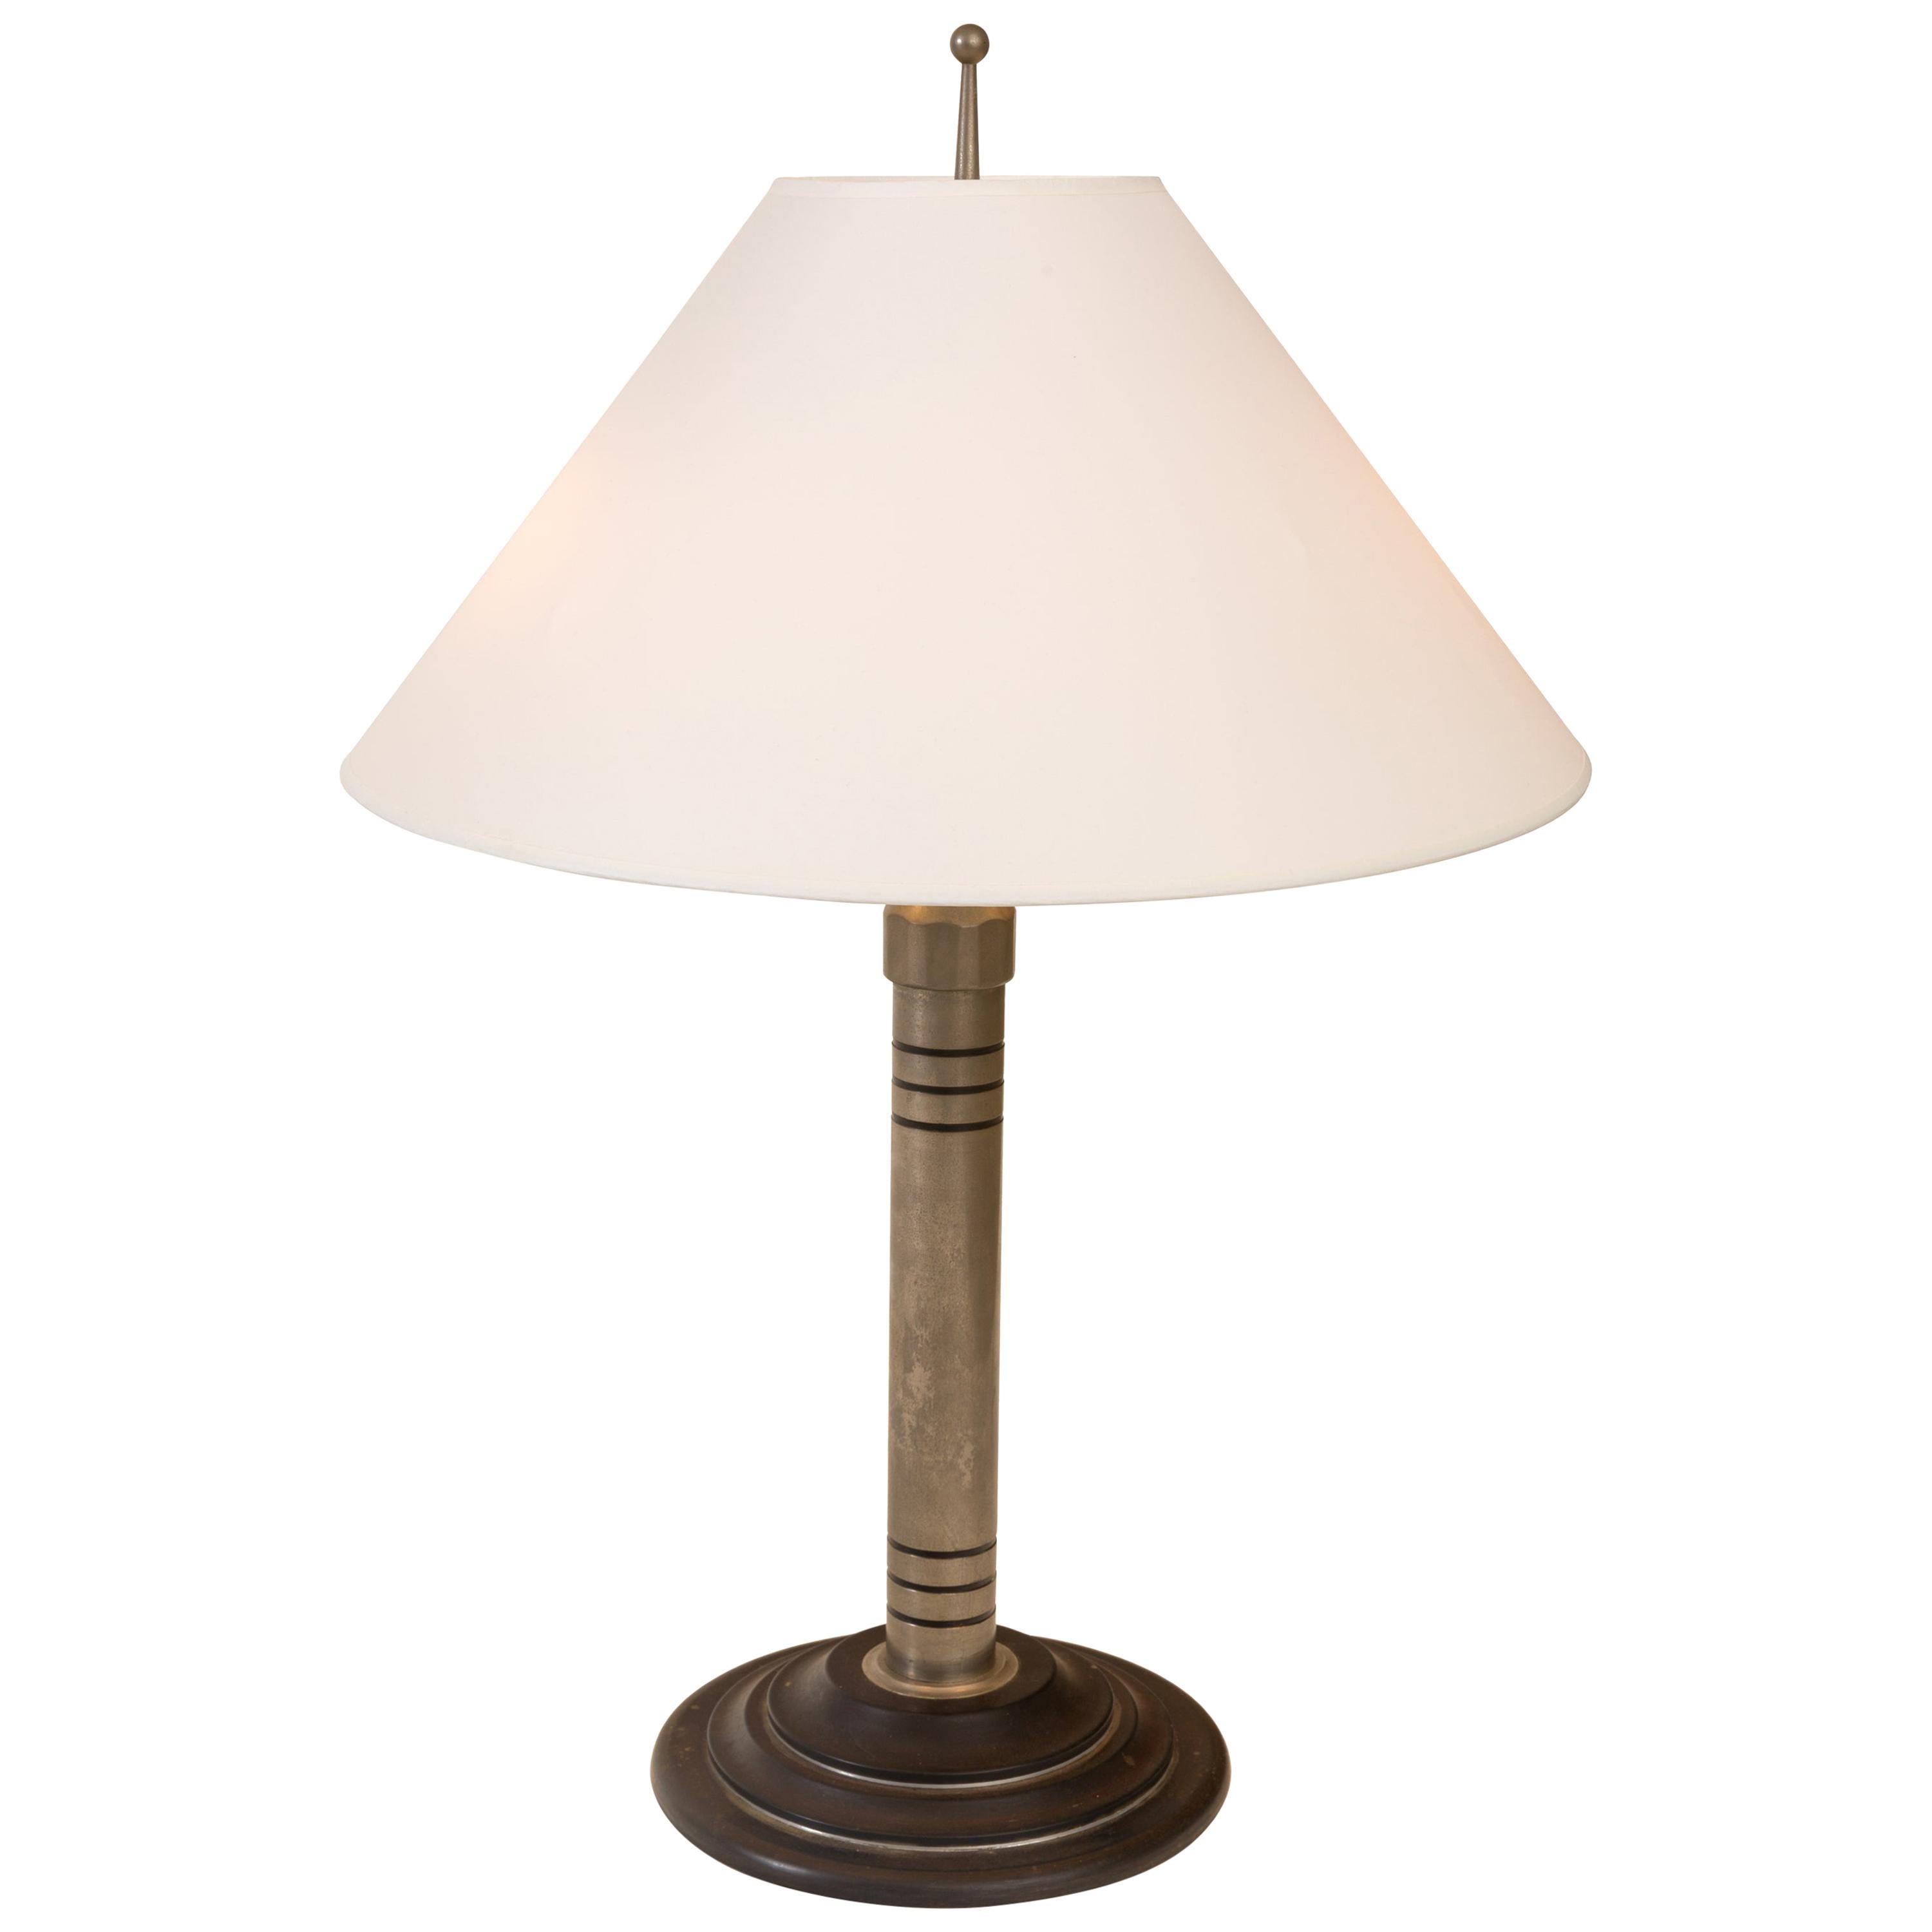 Machine Age Table Lamp, USA 1930s For Sale